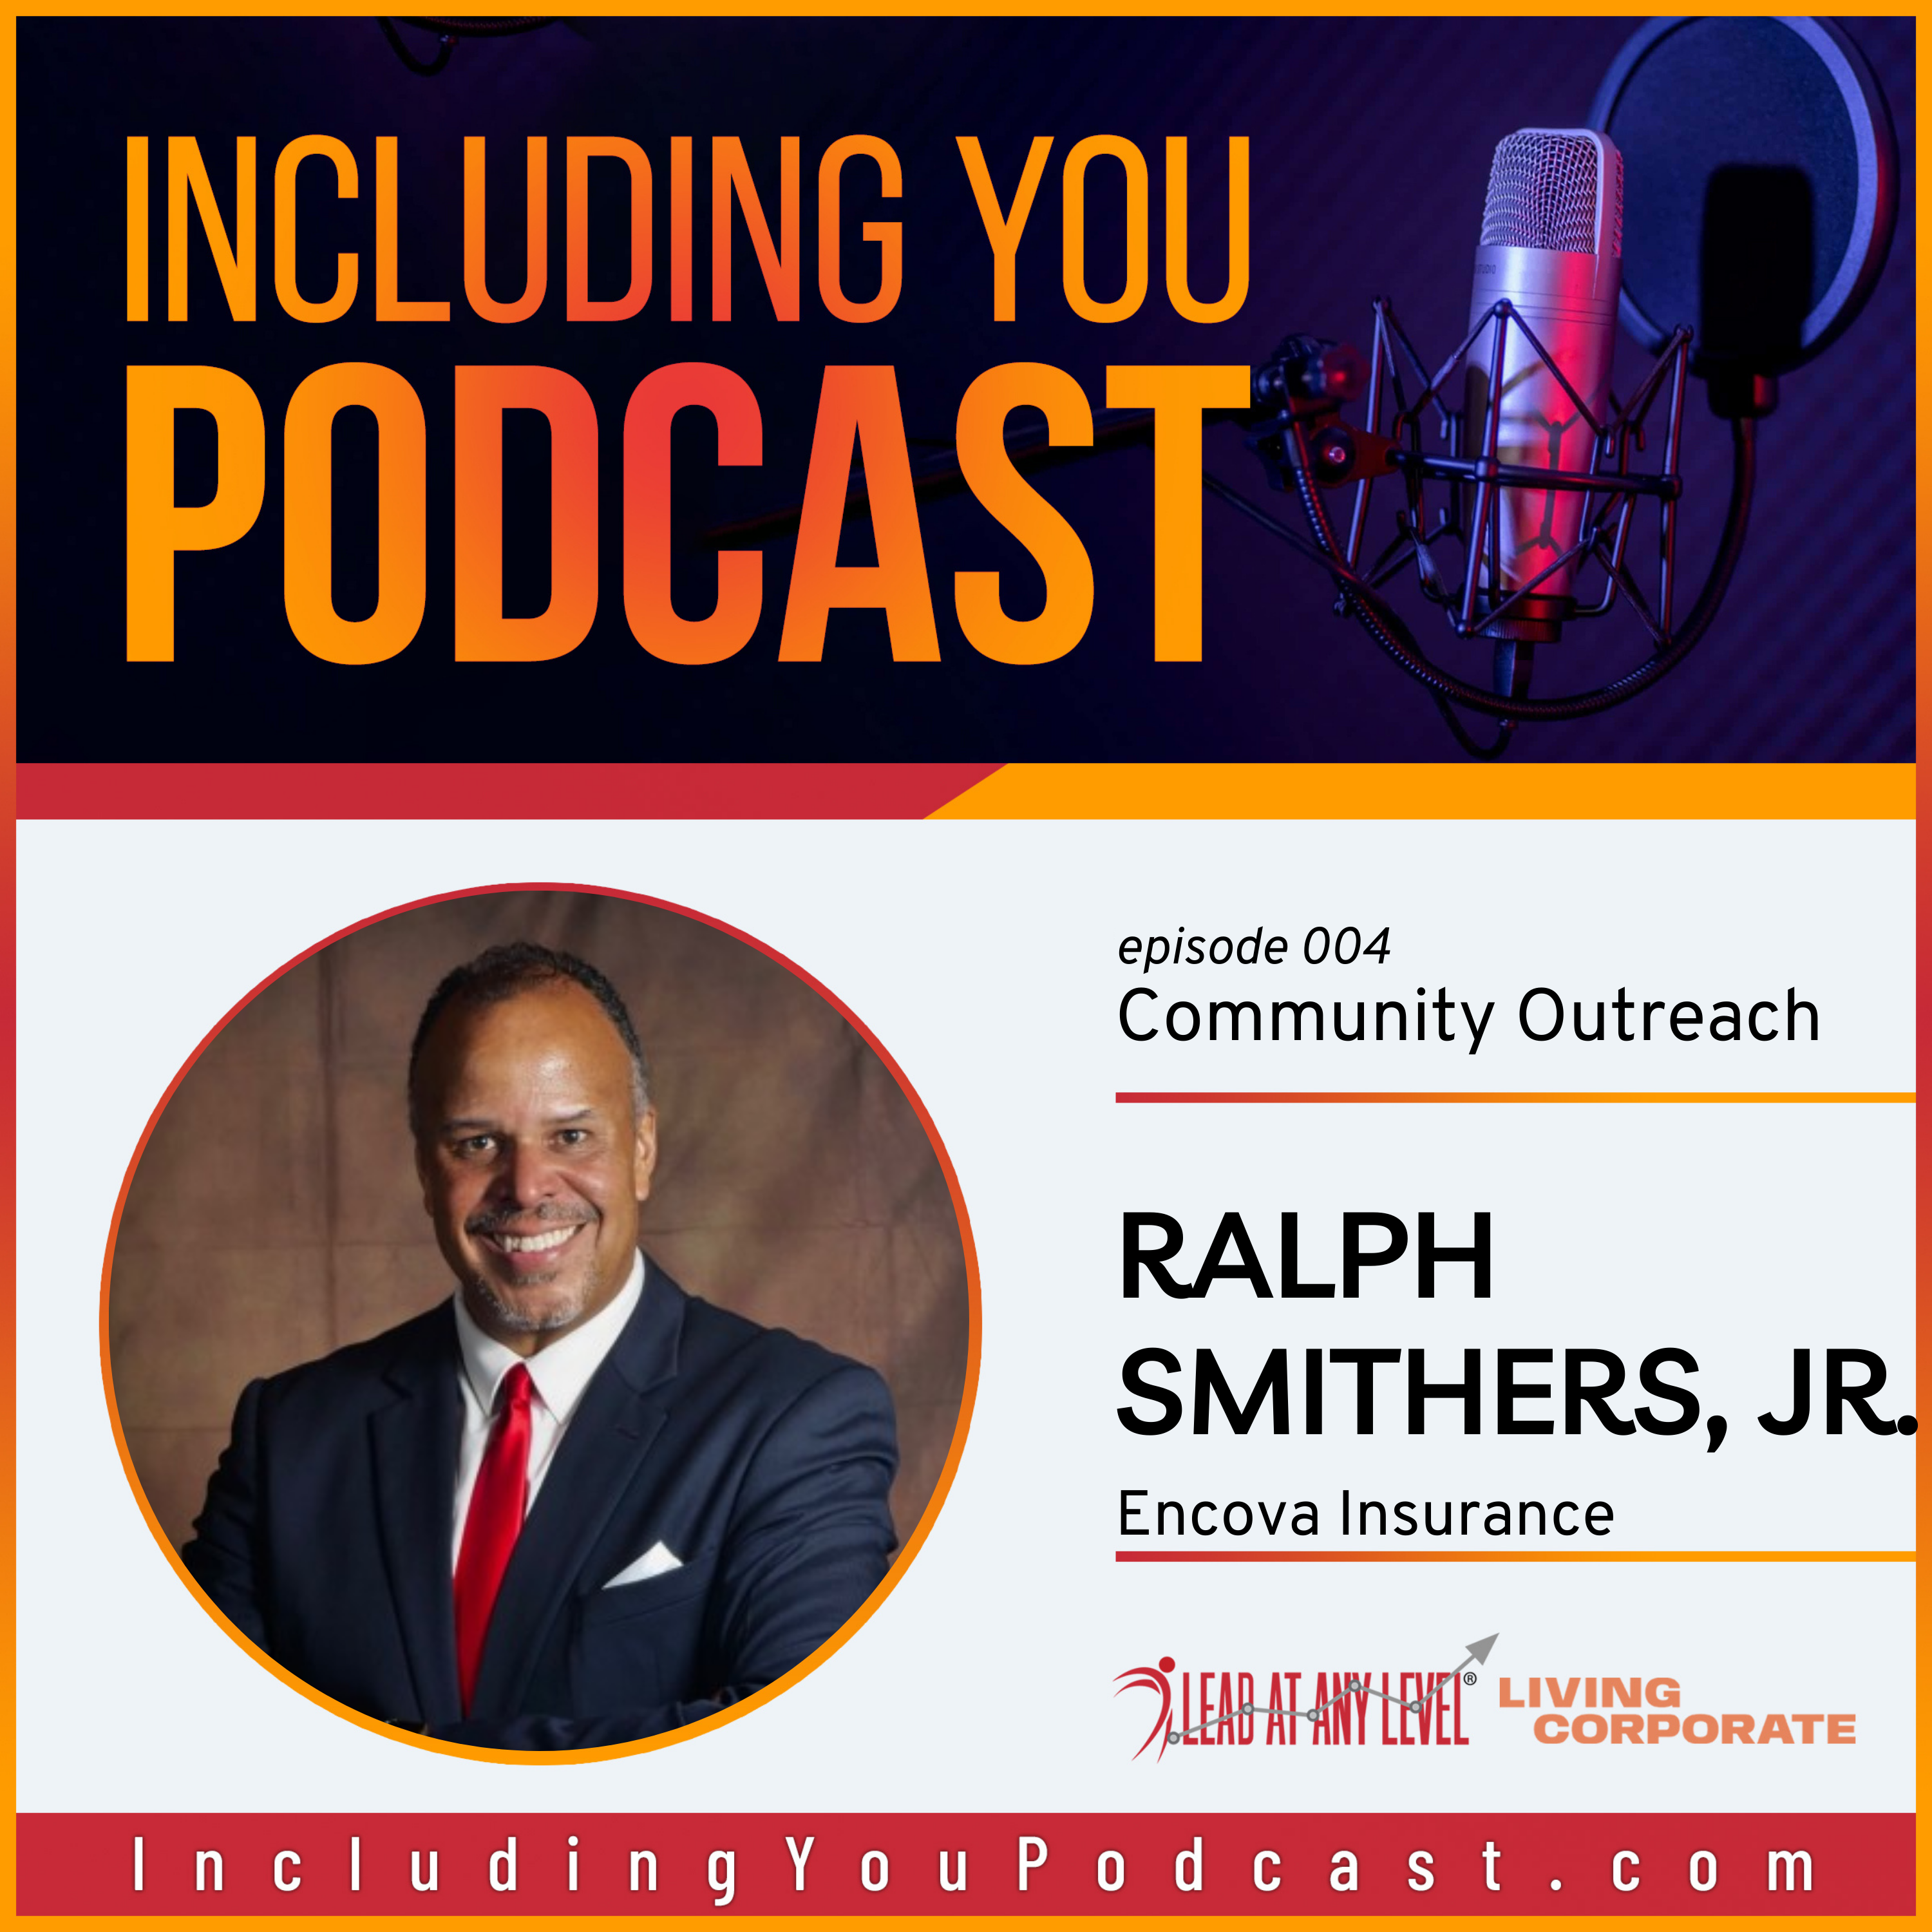 Community Outreach with Ralph Smithers Jr. (Including You Podcast)